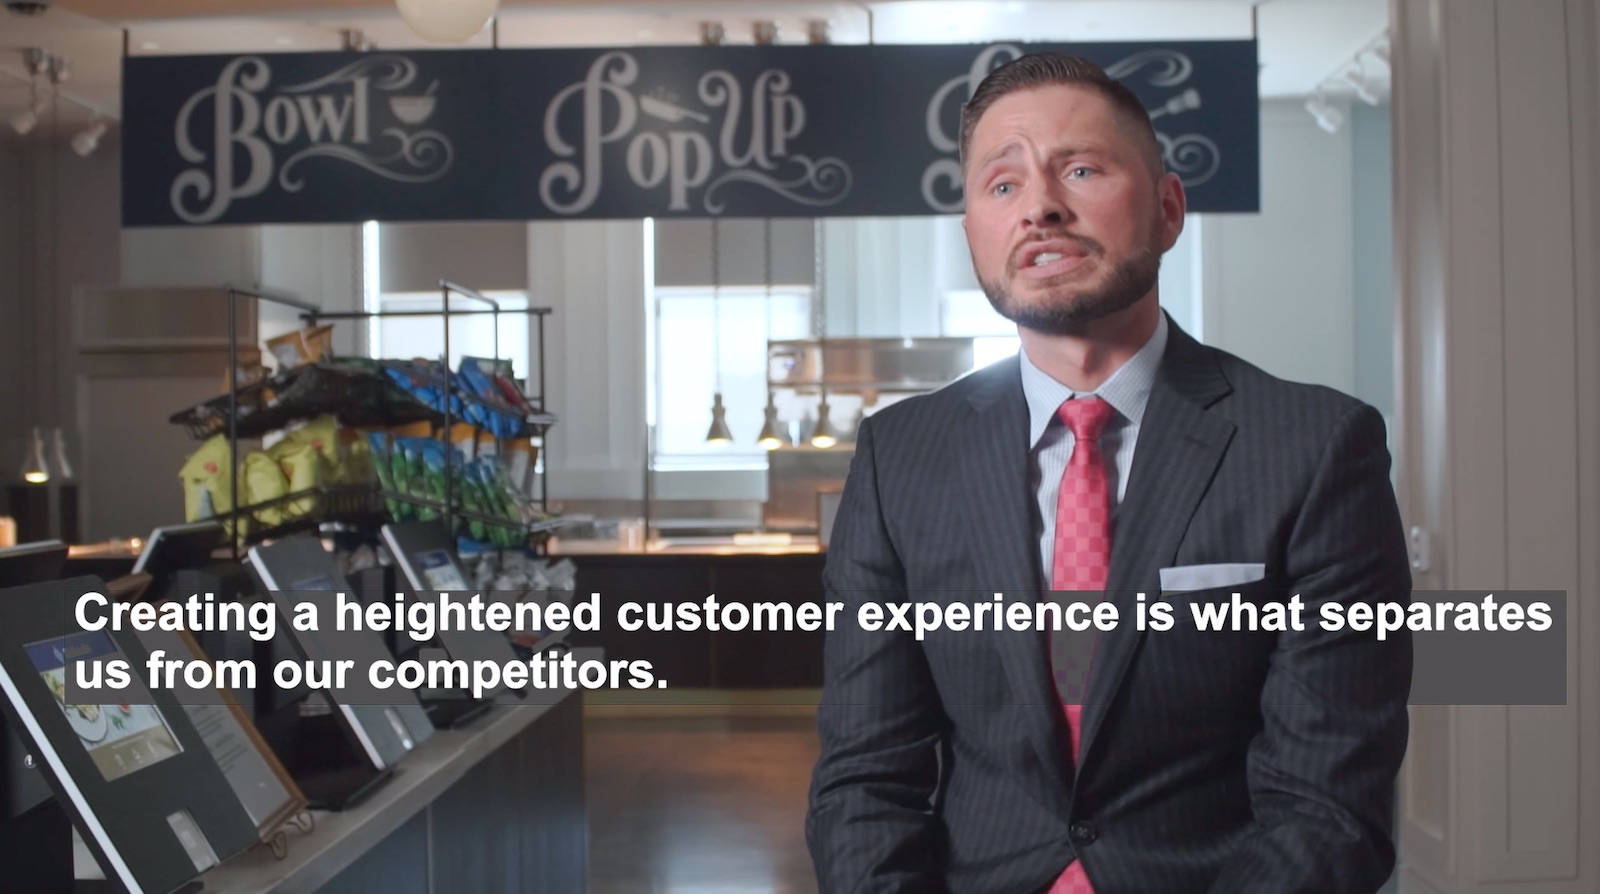 exceptional experience makes brands stand out